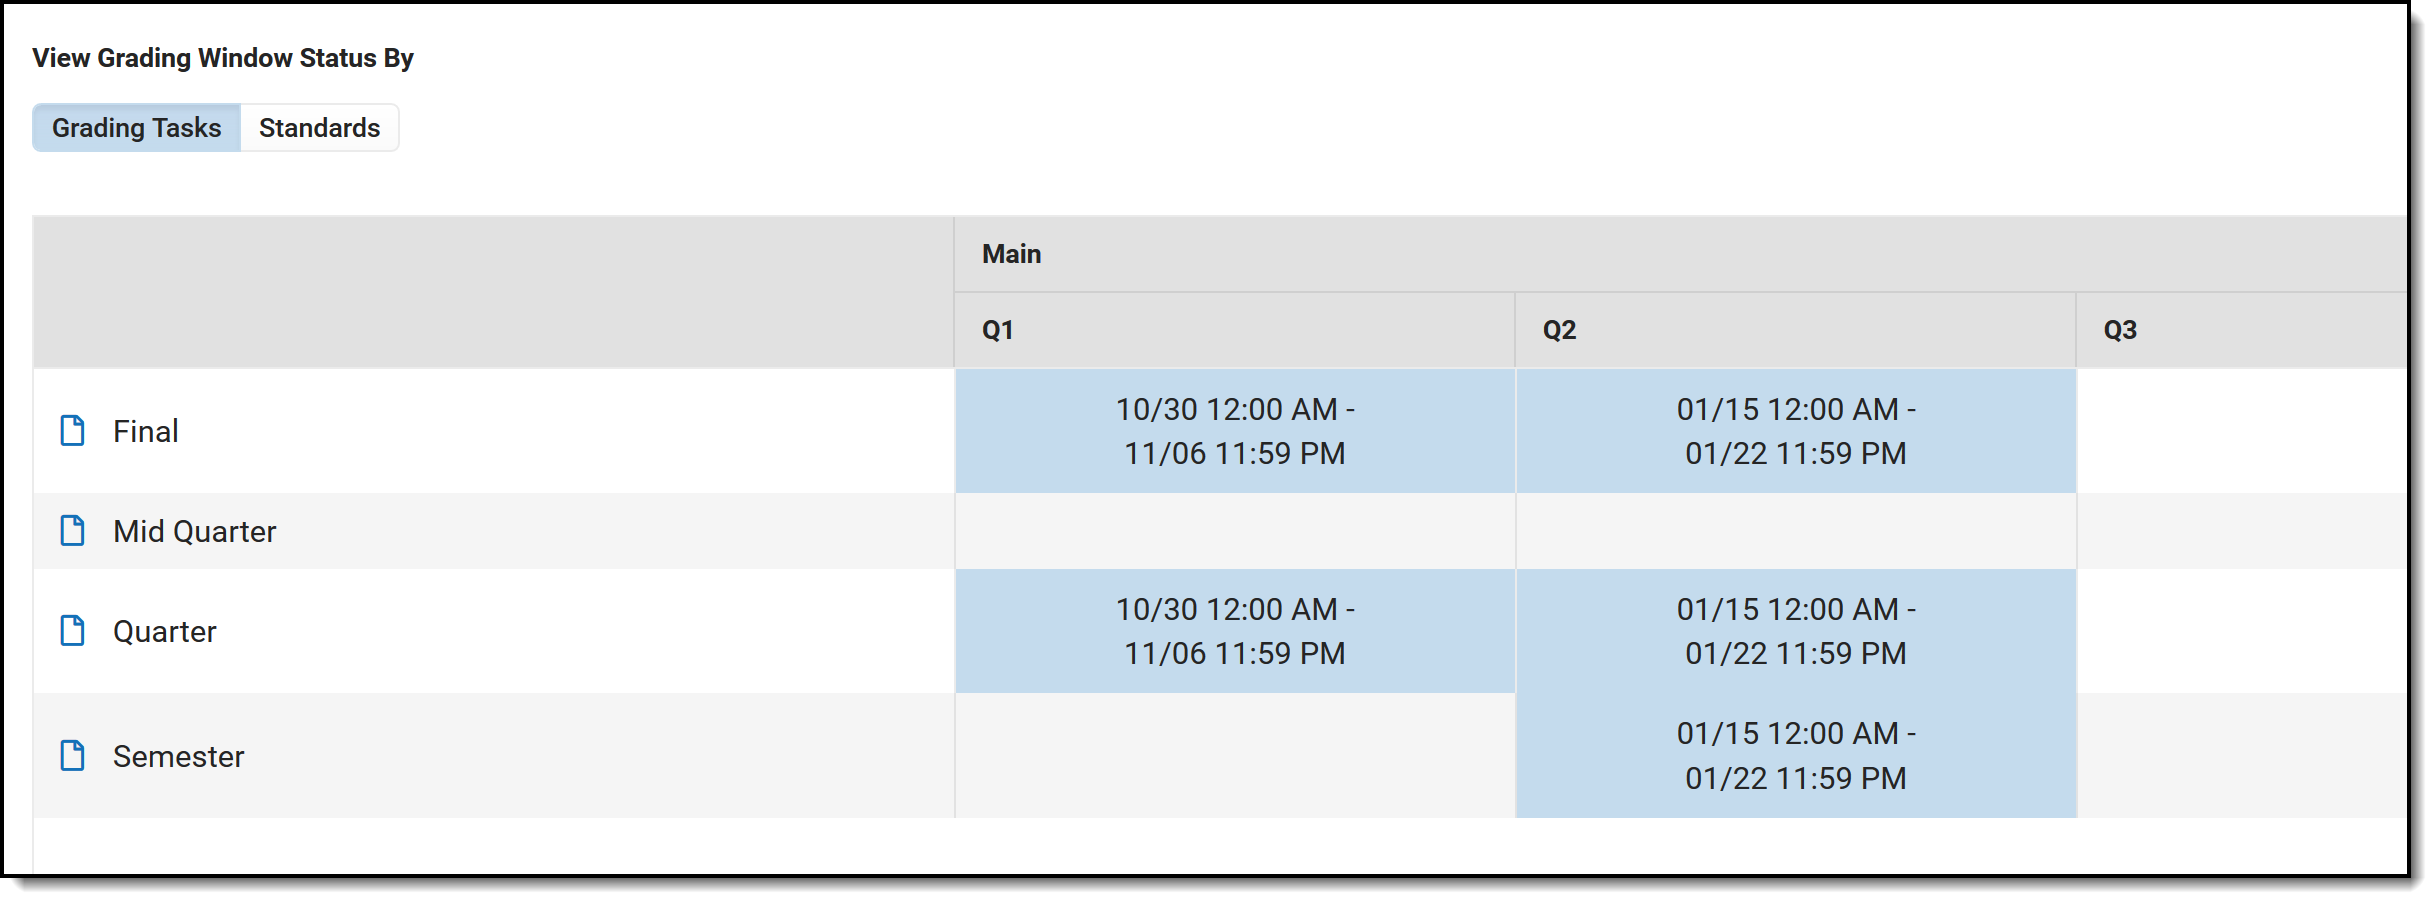 Screenshot showing how to view grading window status by grading tasks.